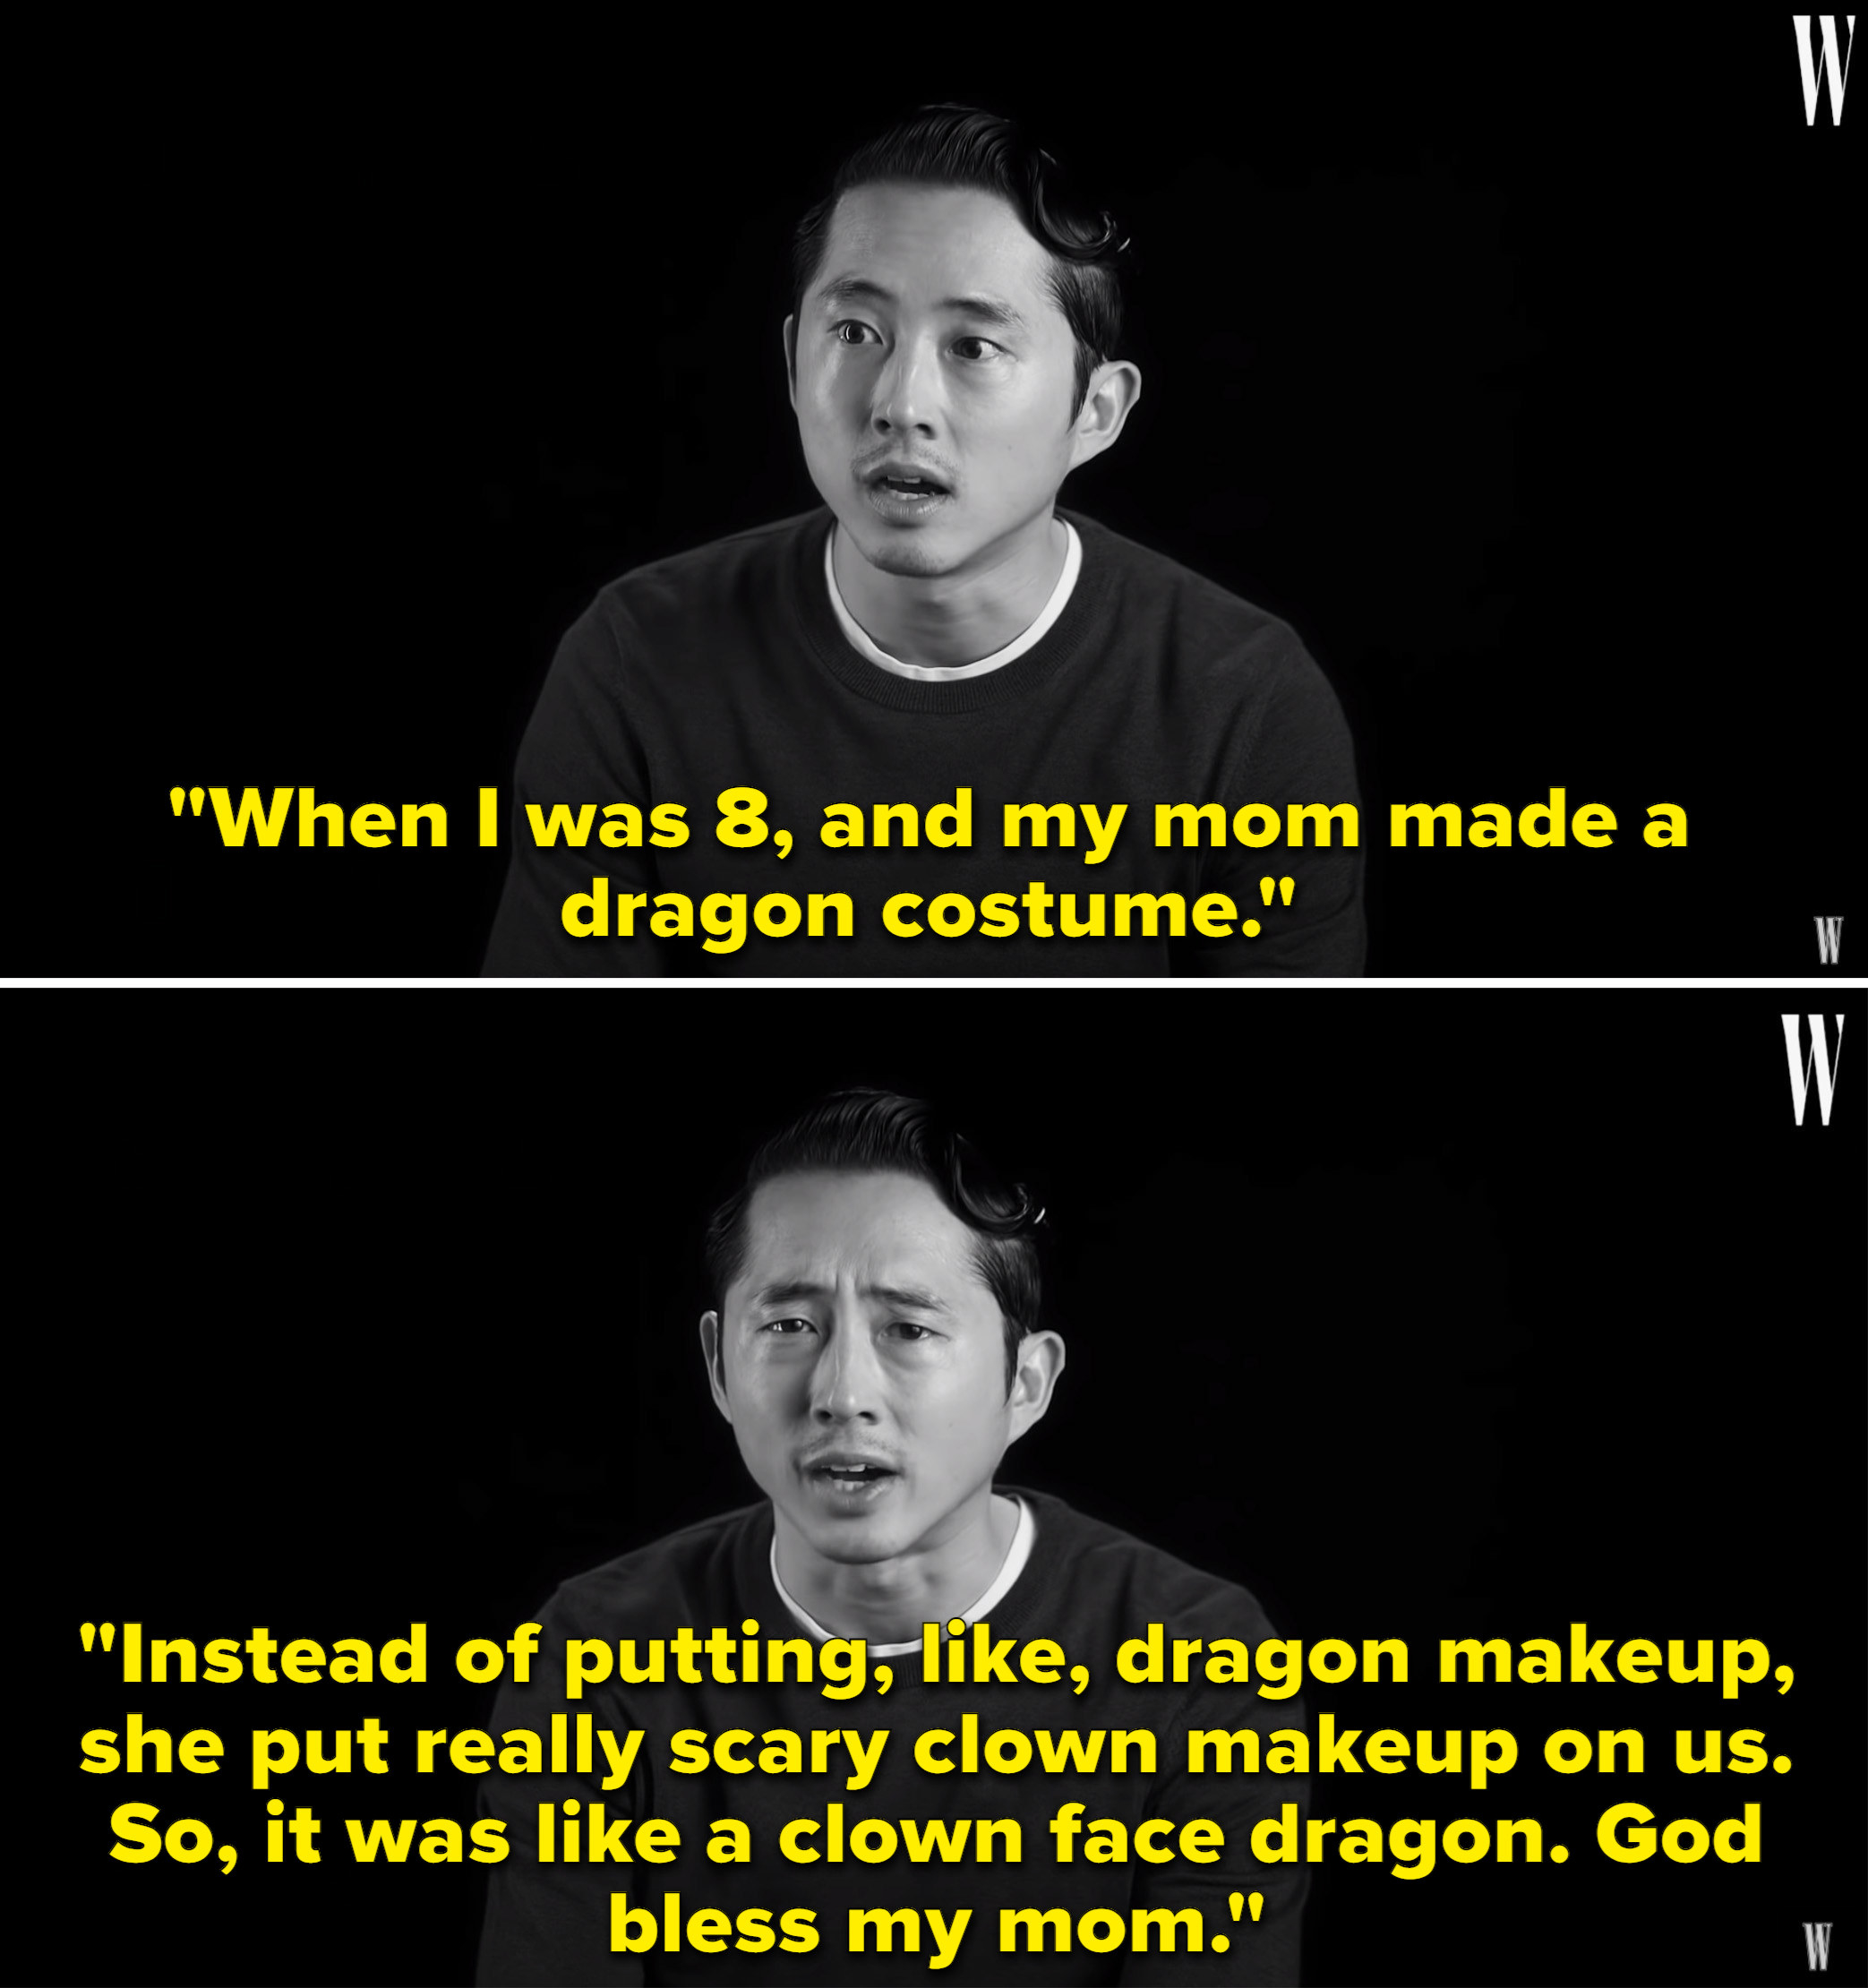 Steven saying his mom made him a dragon costume, but also put him in &quot;scary clown makeup&quot;